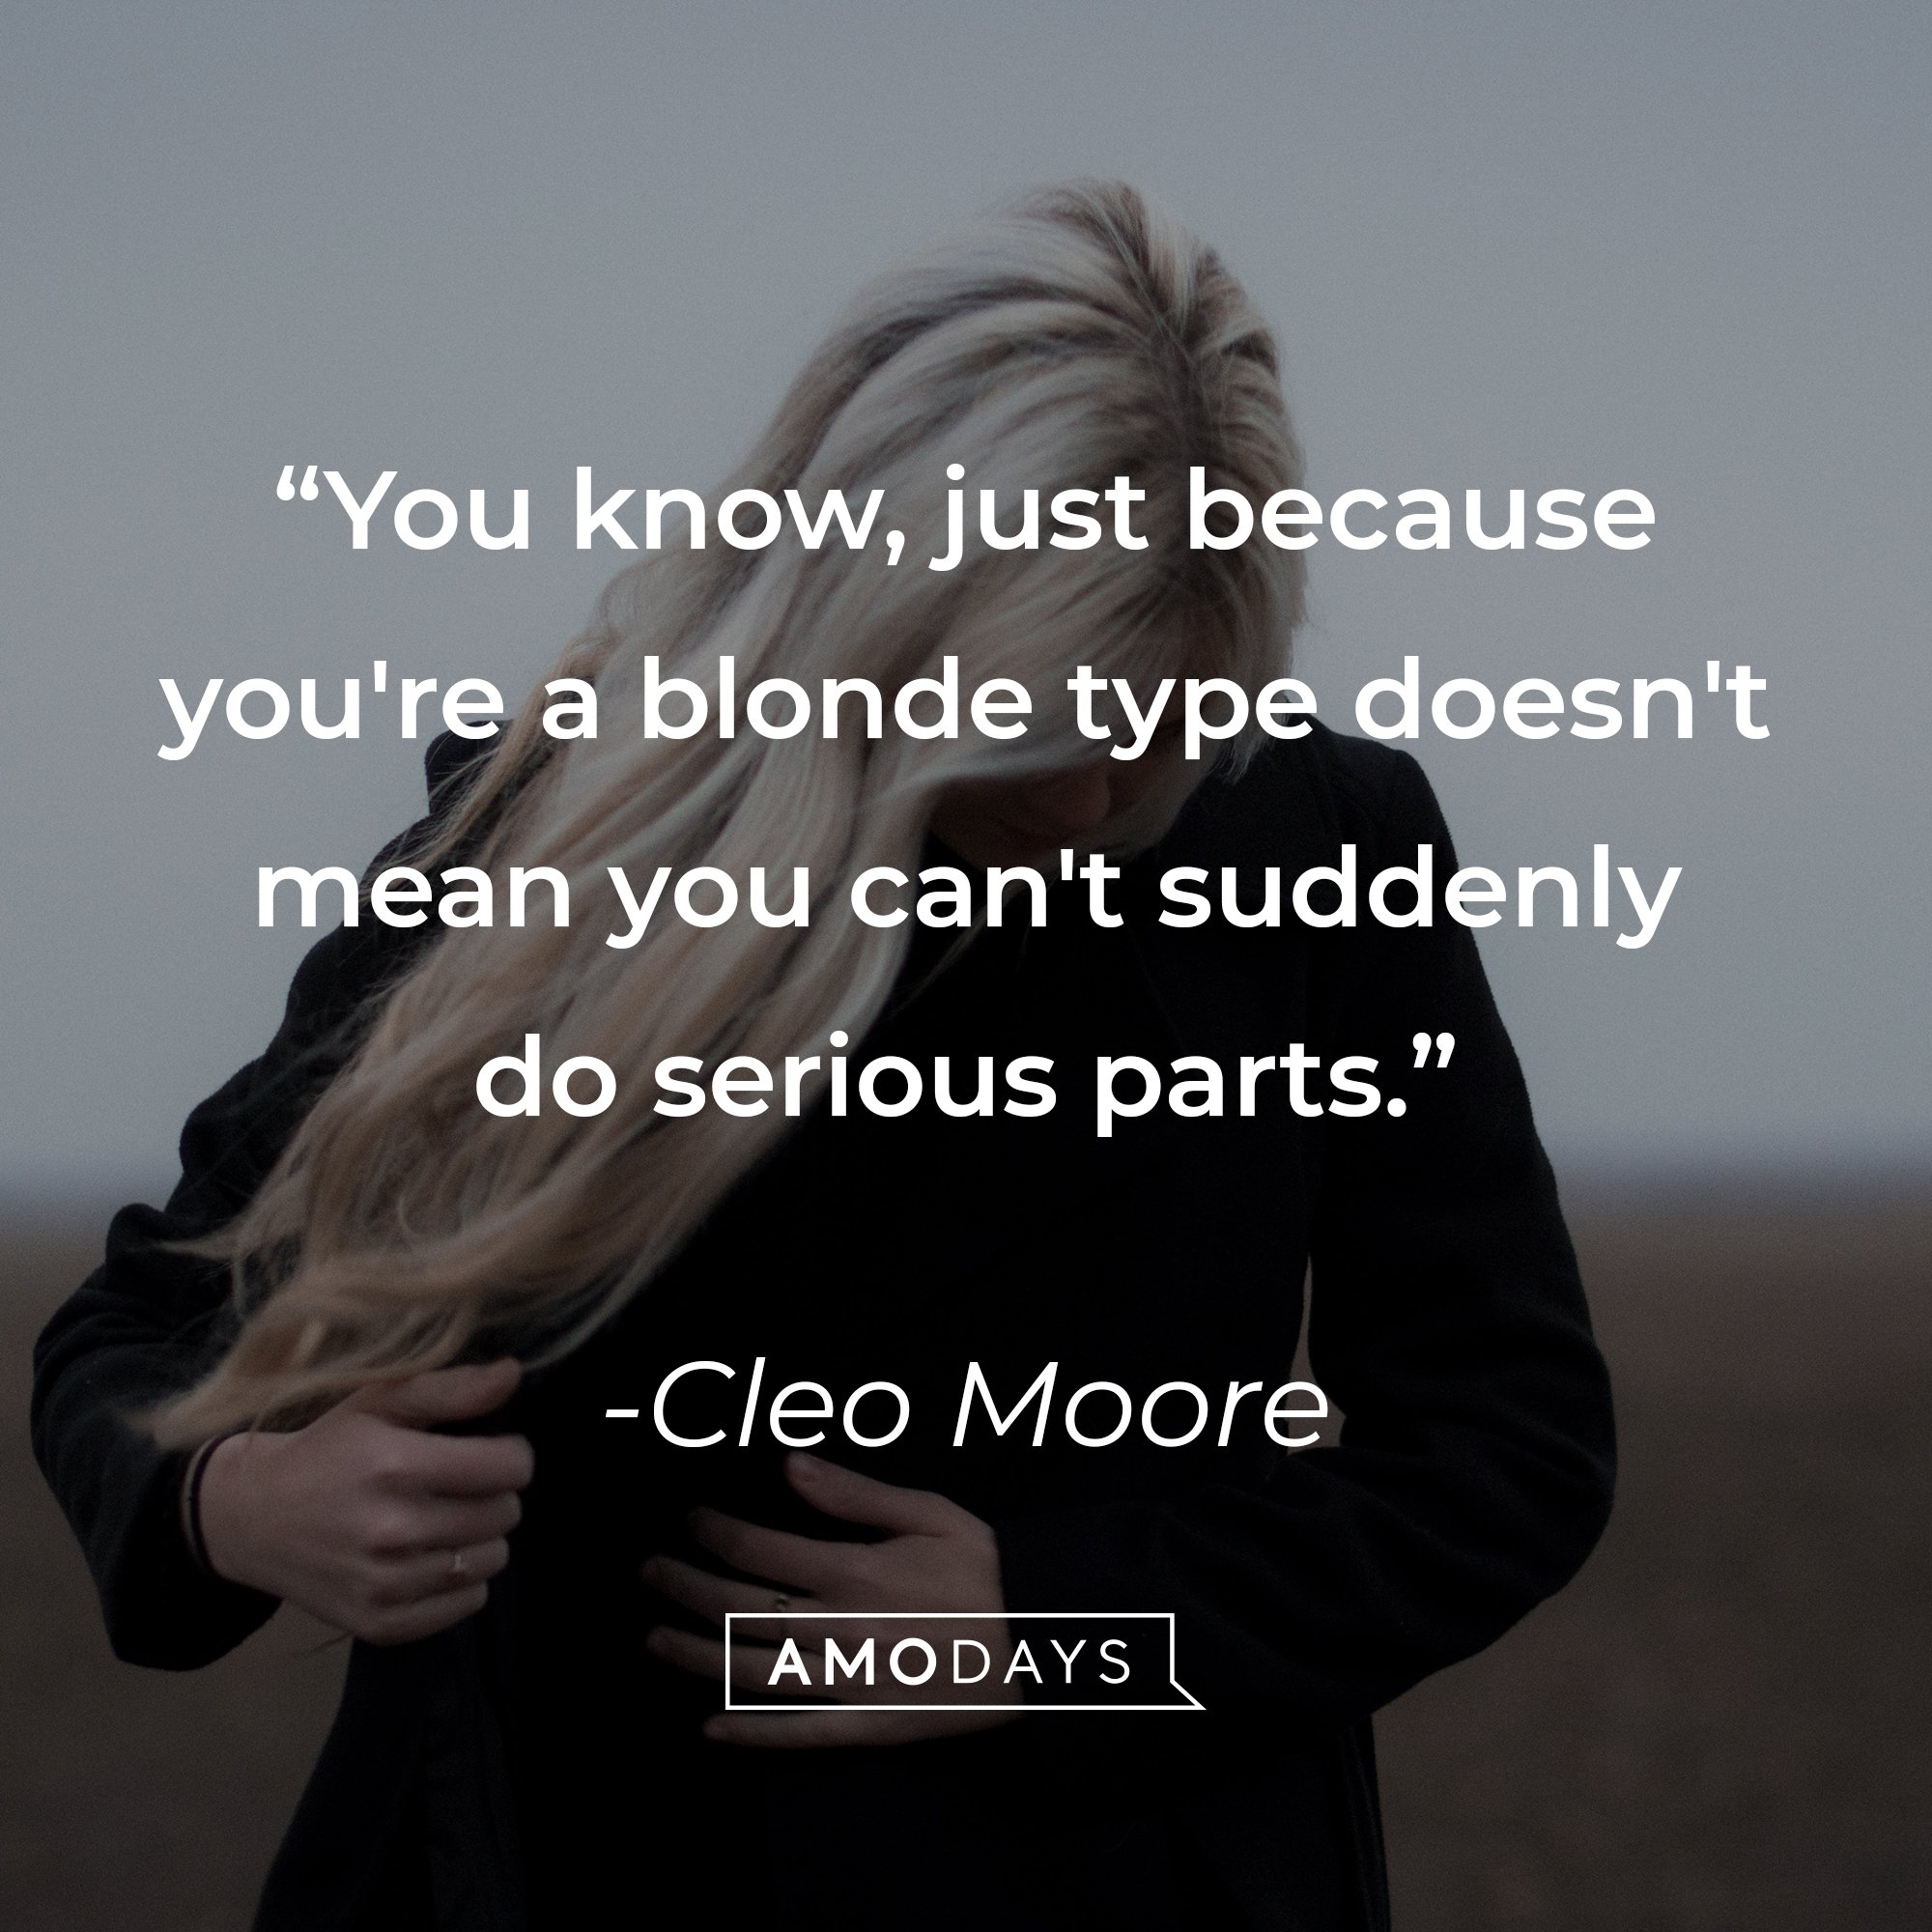 Cleo Moore’s quote: "You know, just because you're a blonde type doesn't mean you can't suddenly do serious parts." | Image: AmoDays